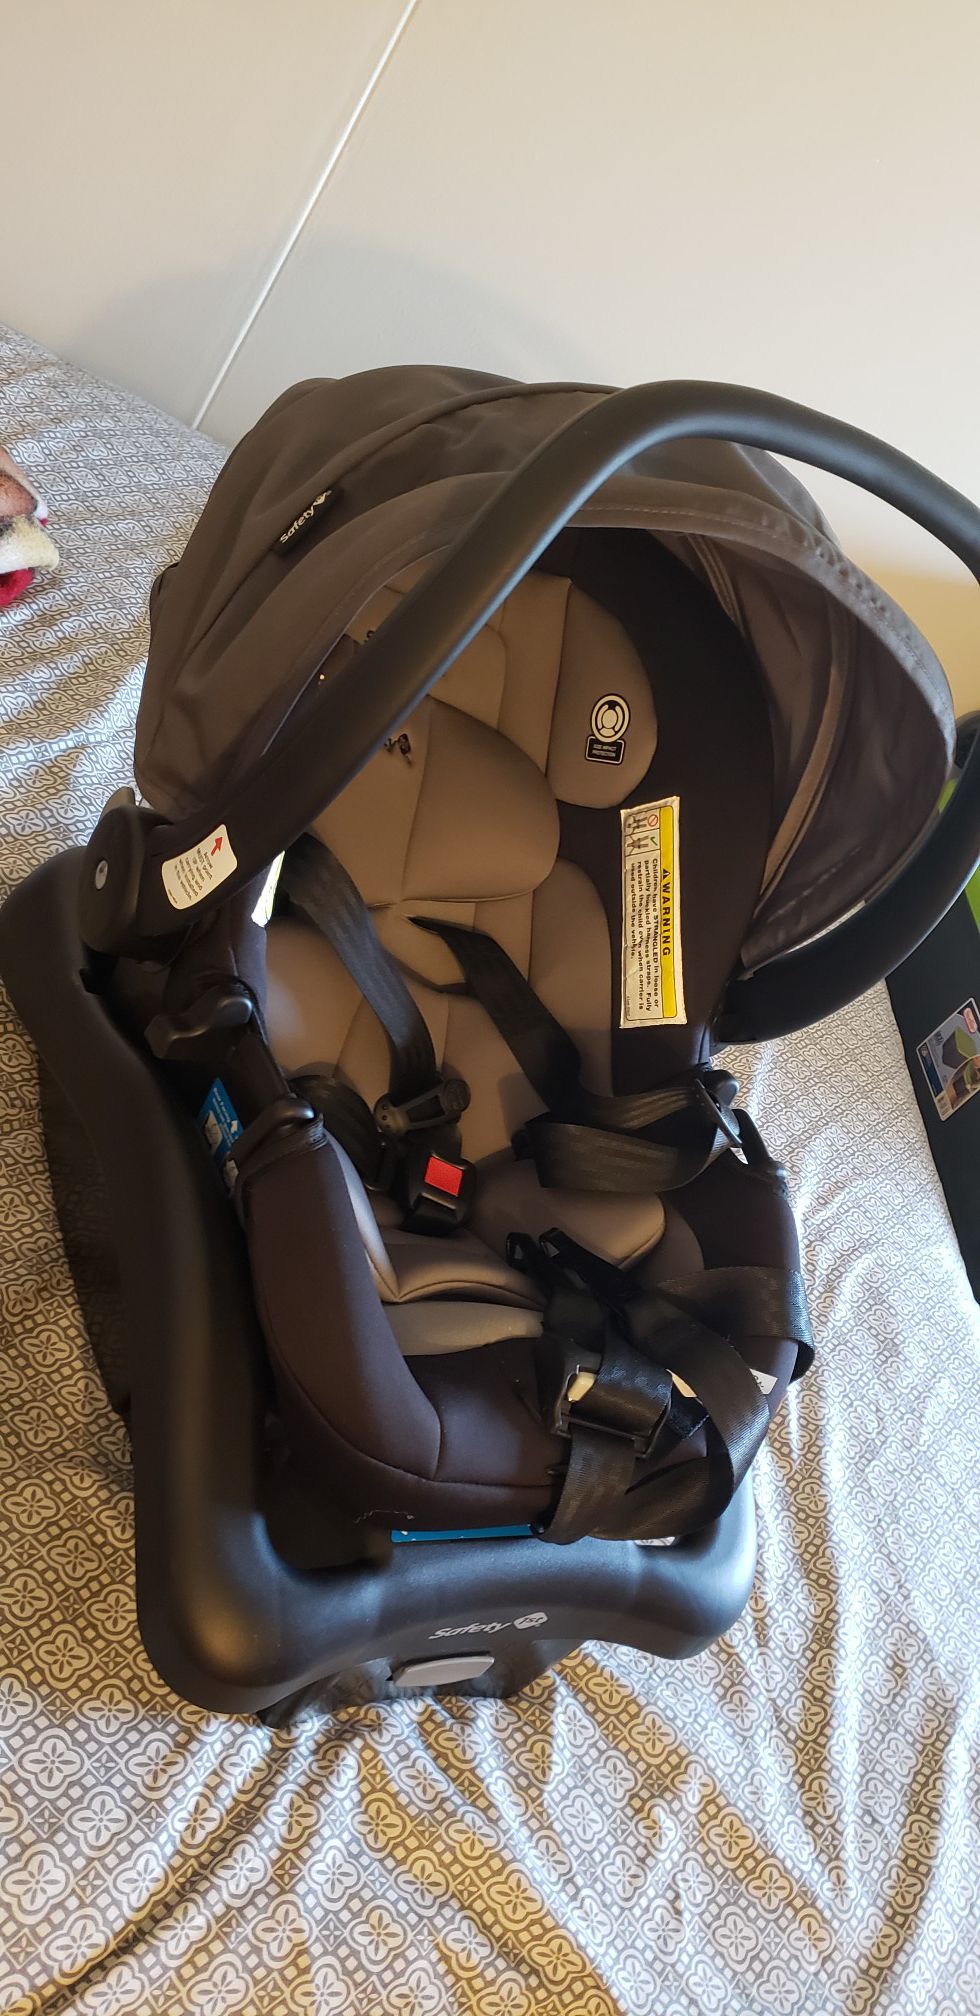 Black and gray baby car seat